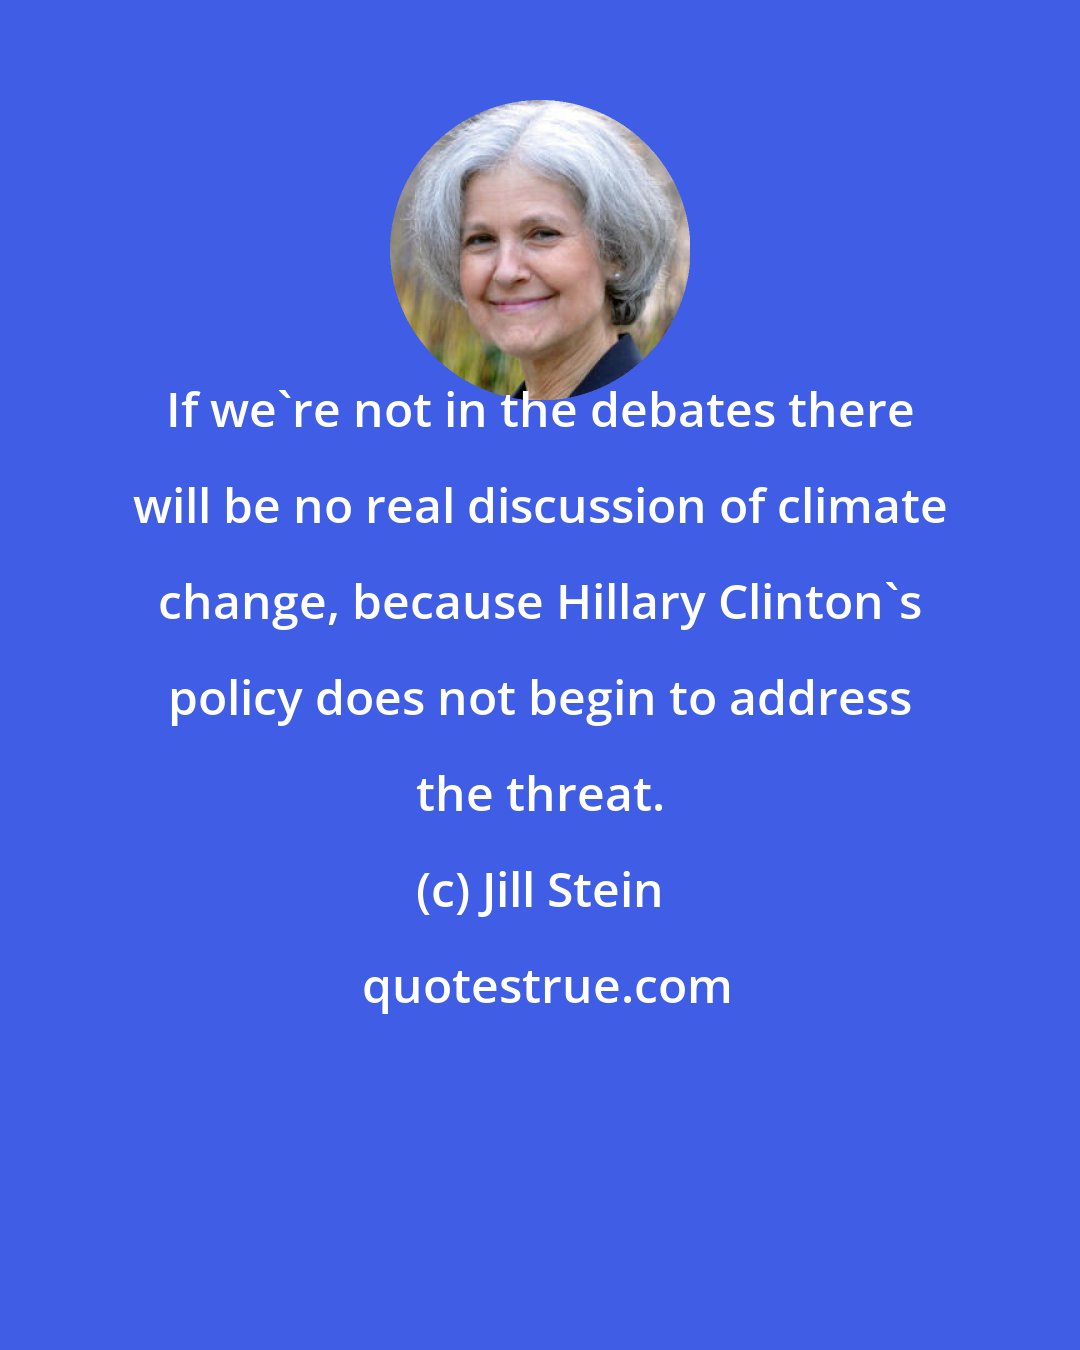 Jill Stein: If we're not in the debates there will be no real discussion of climate change, because Hillary Clinton's policy does not begin to address the threat.